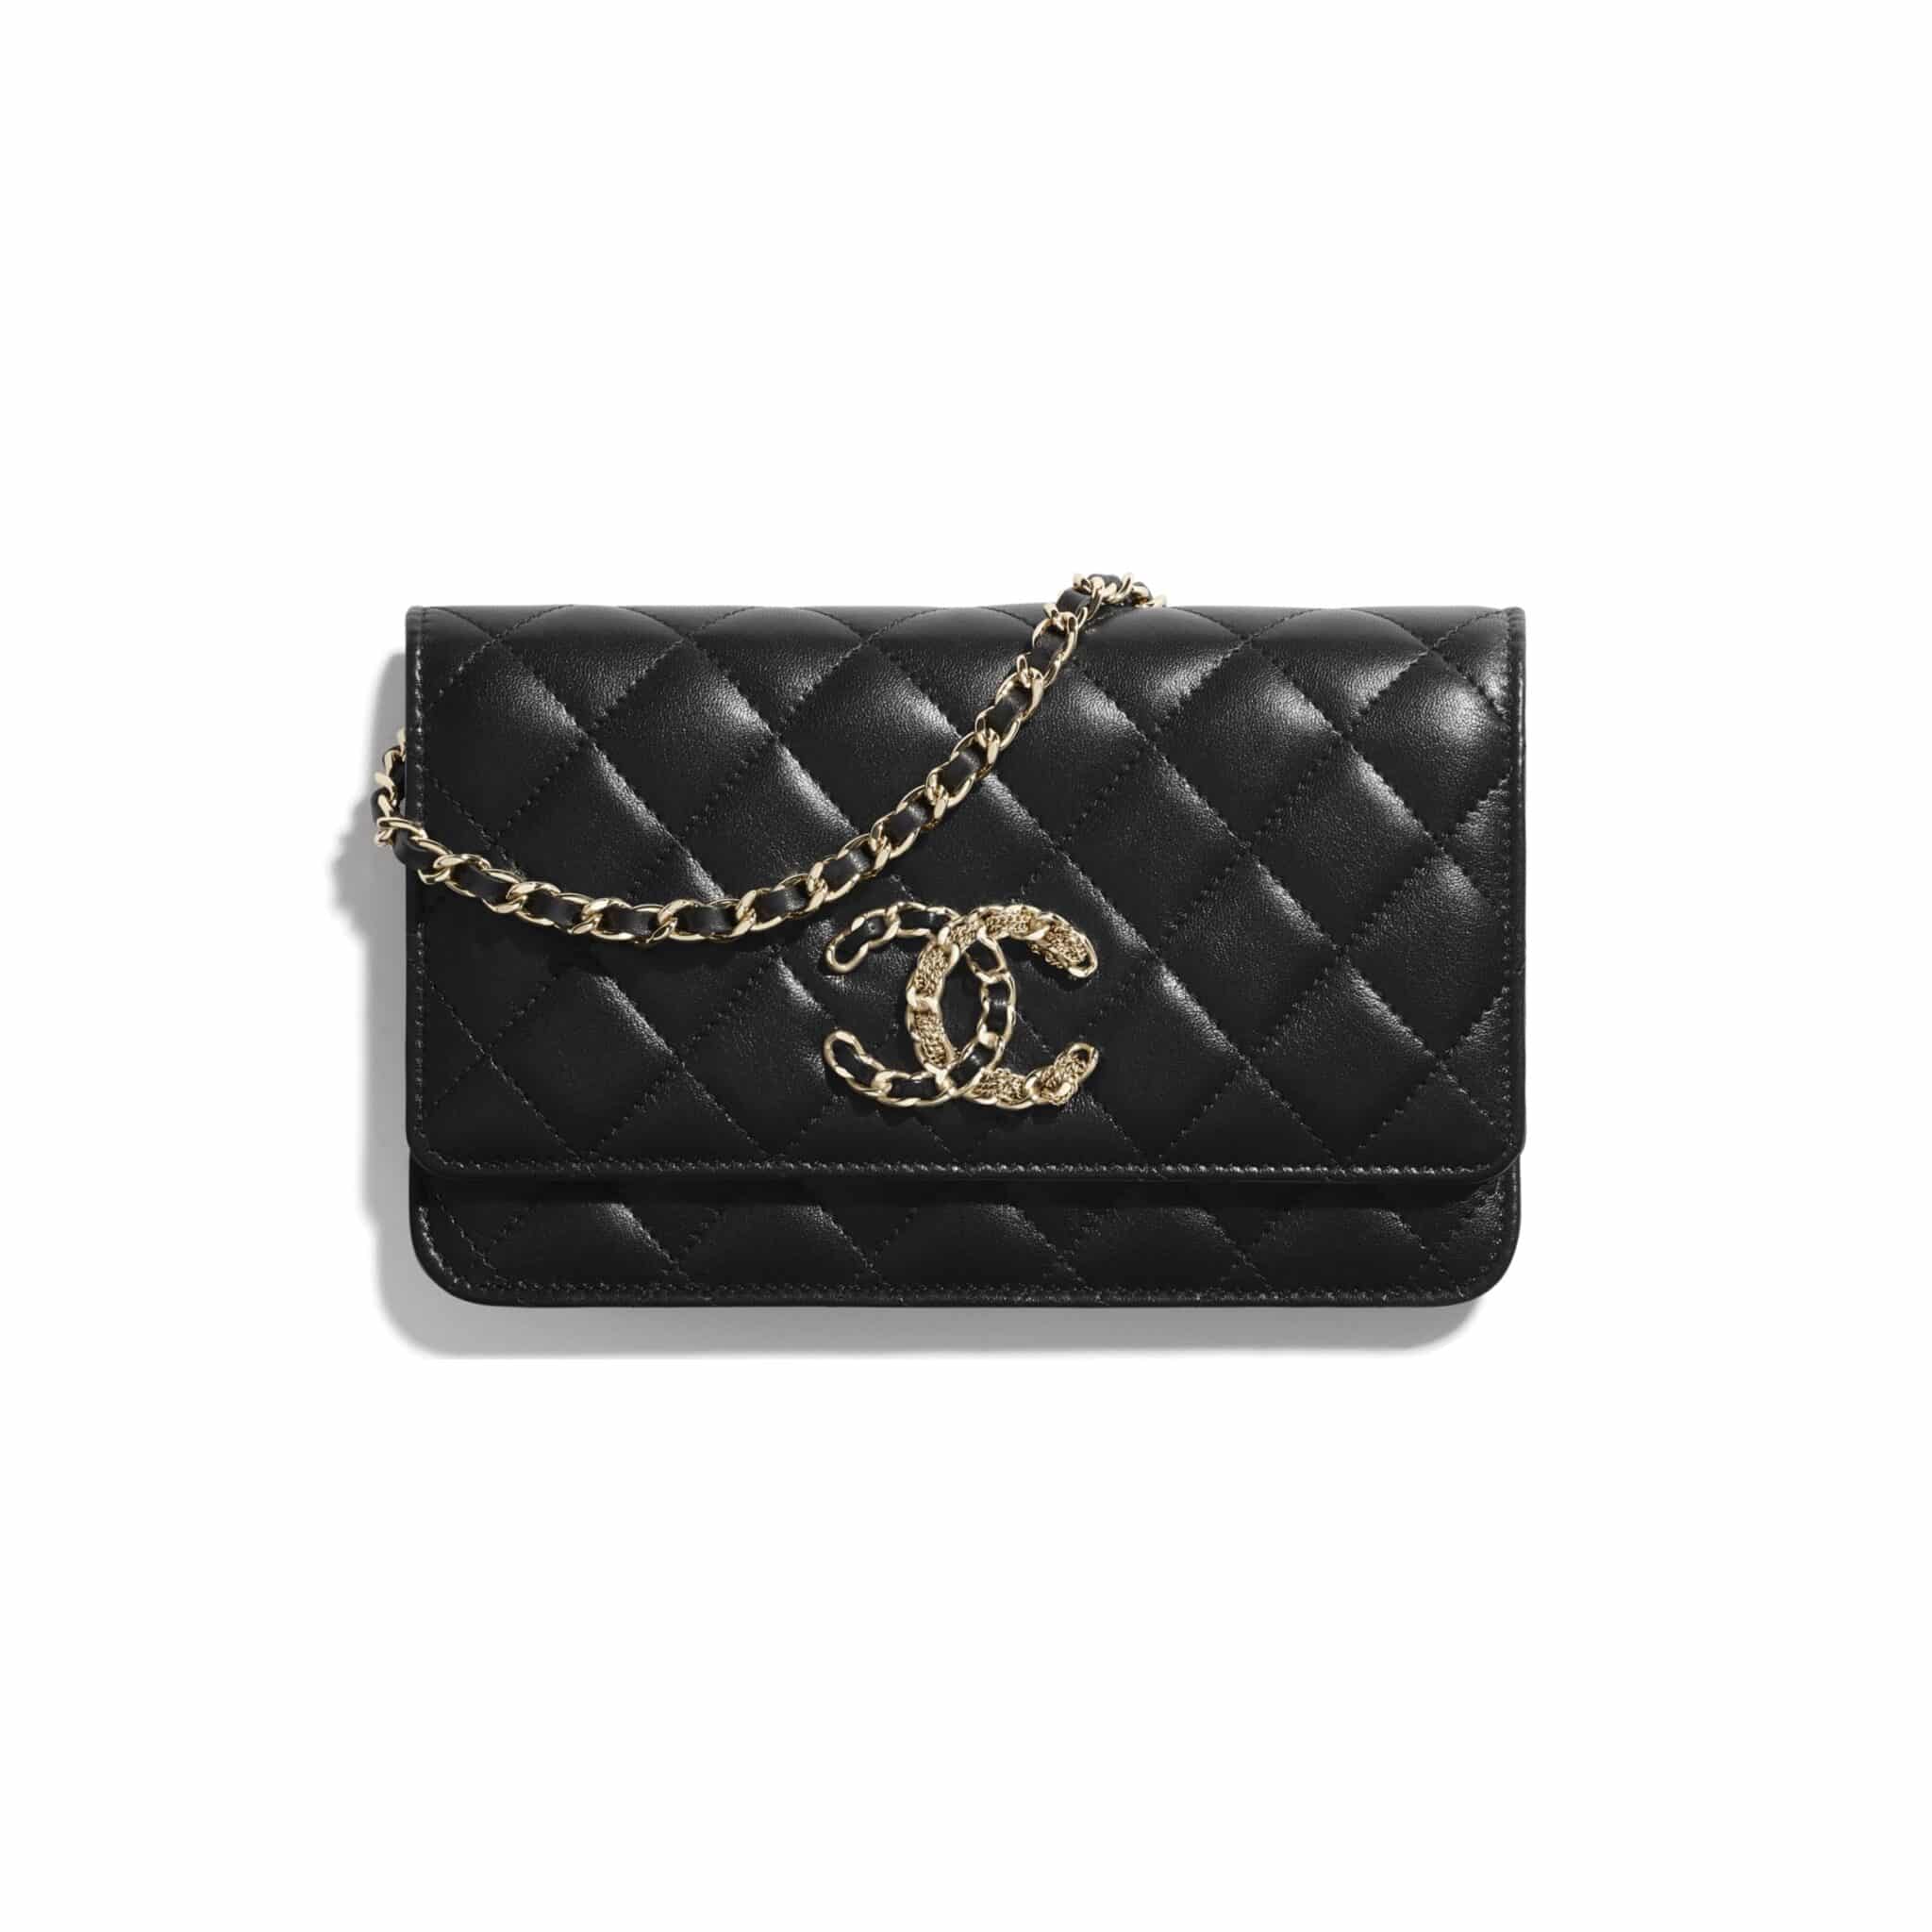 Chanel Fall/Winter 2020 Small Leather Goods Collection - Spotted